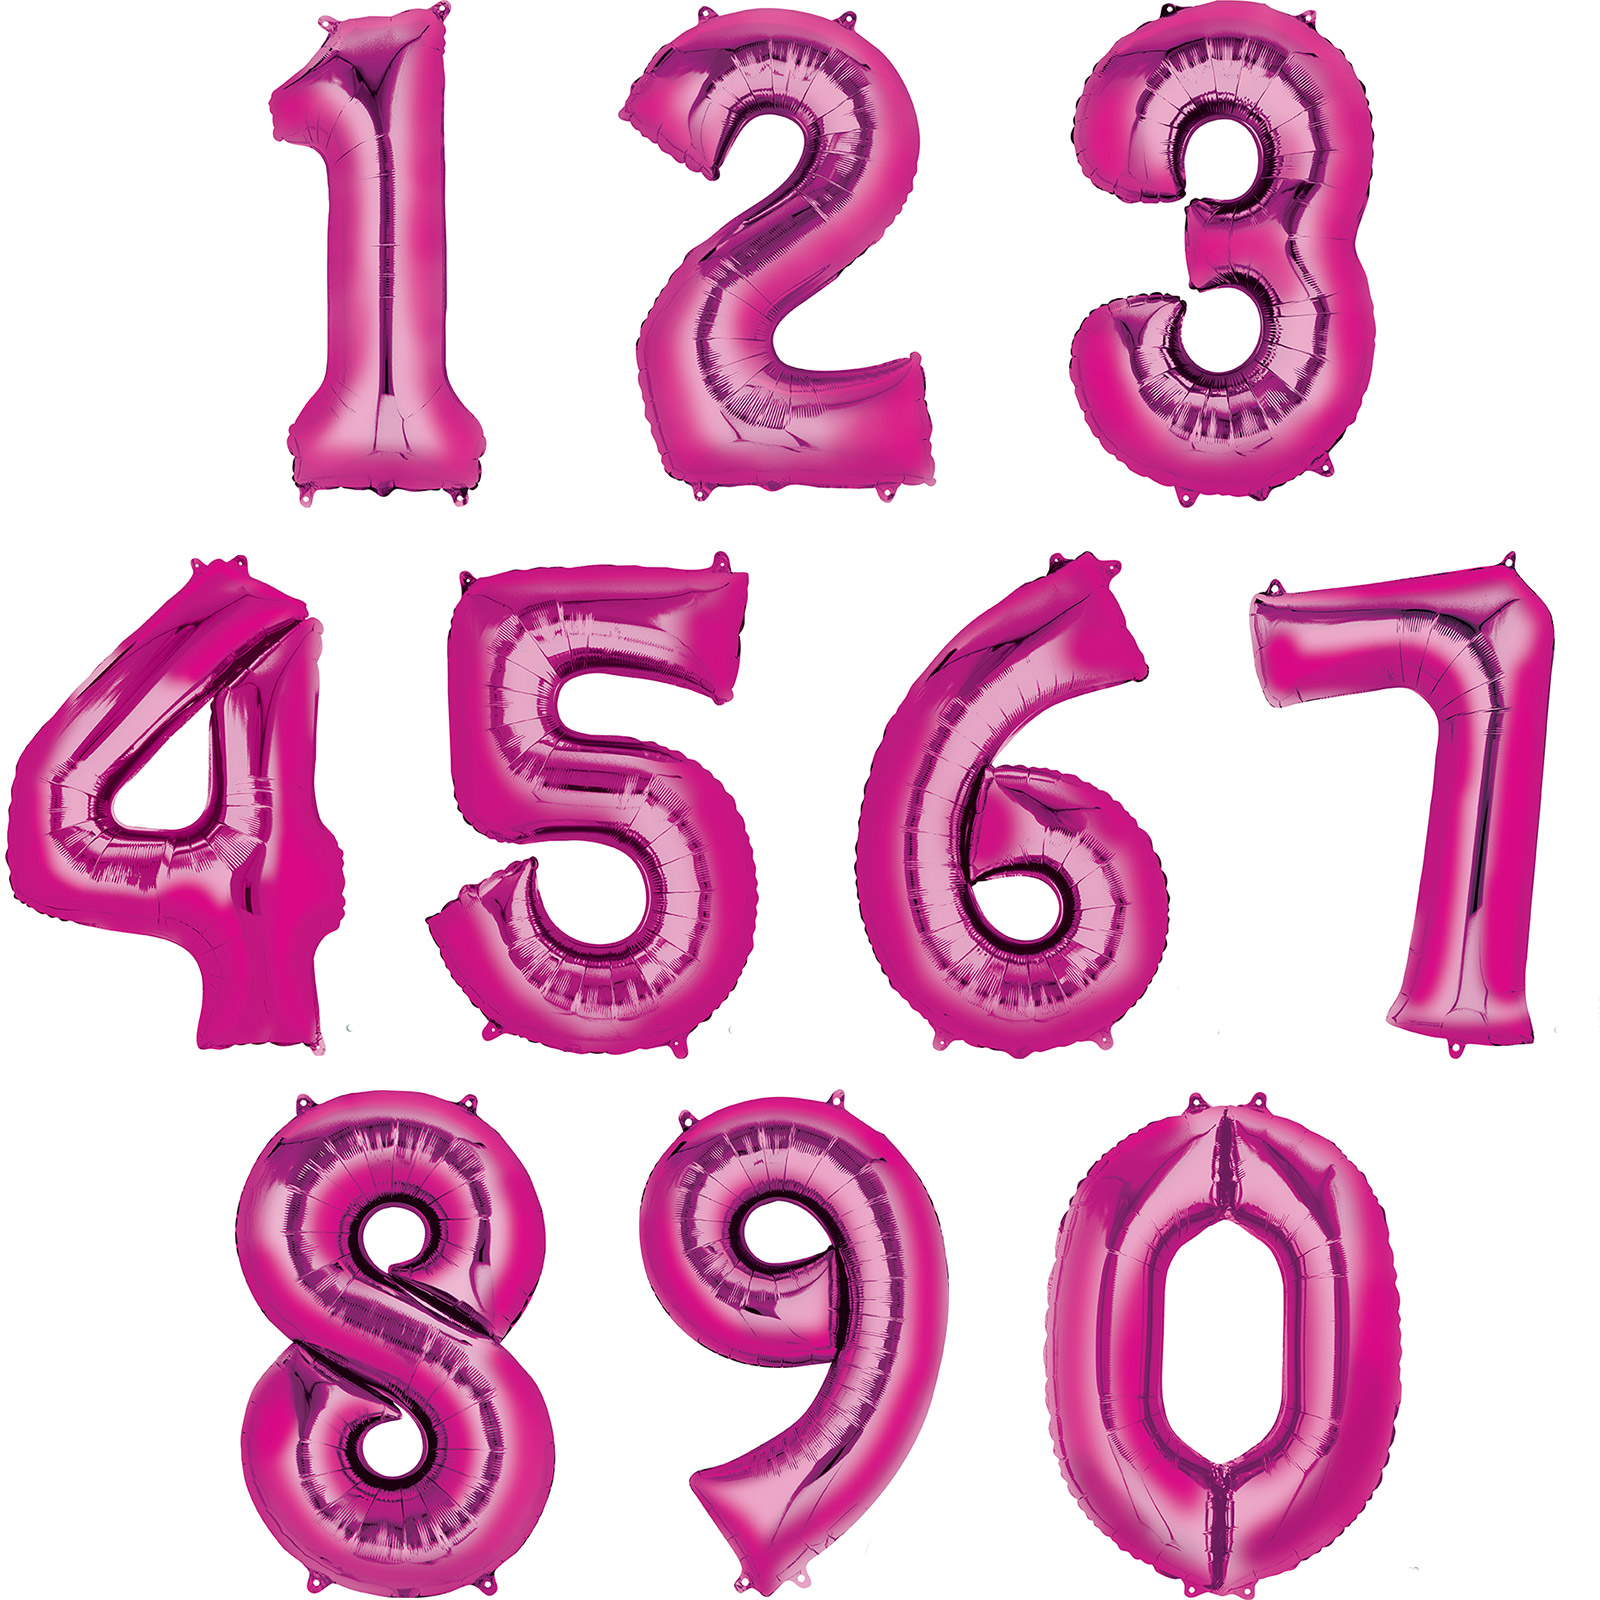 giant-number-balloons--pink